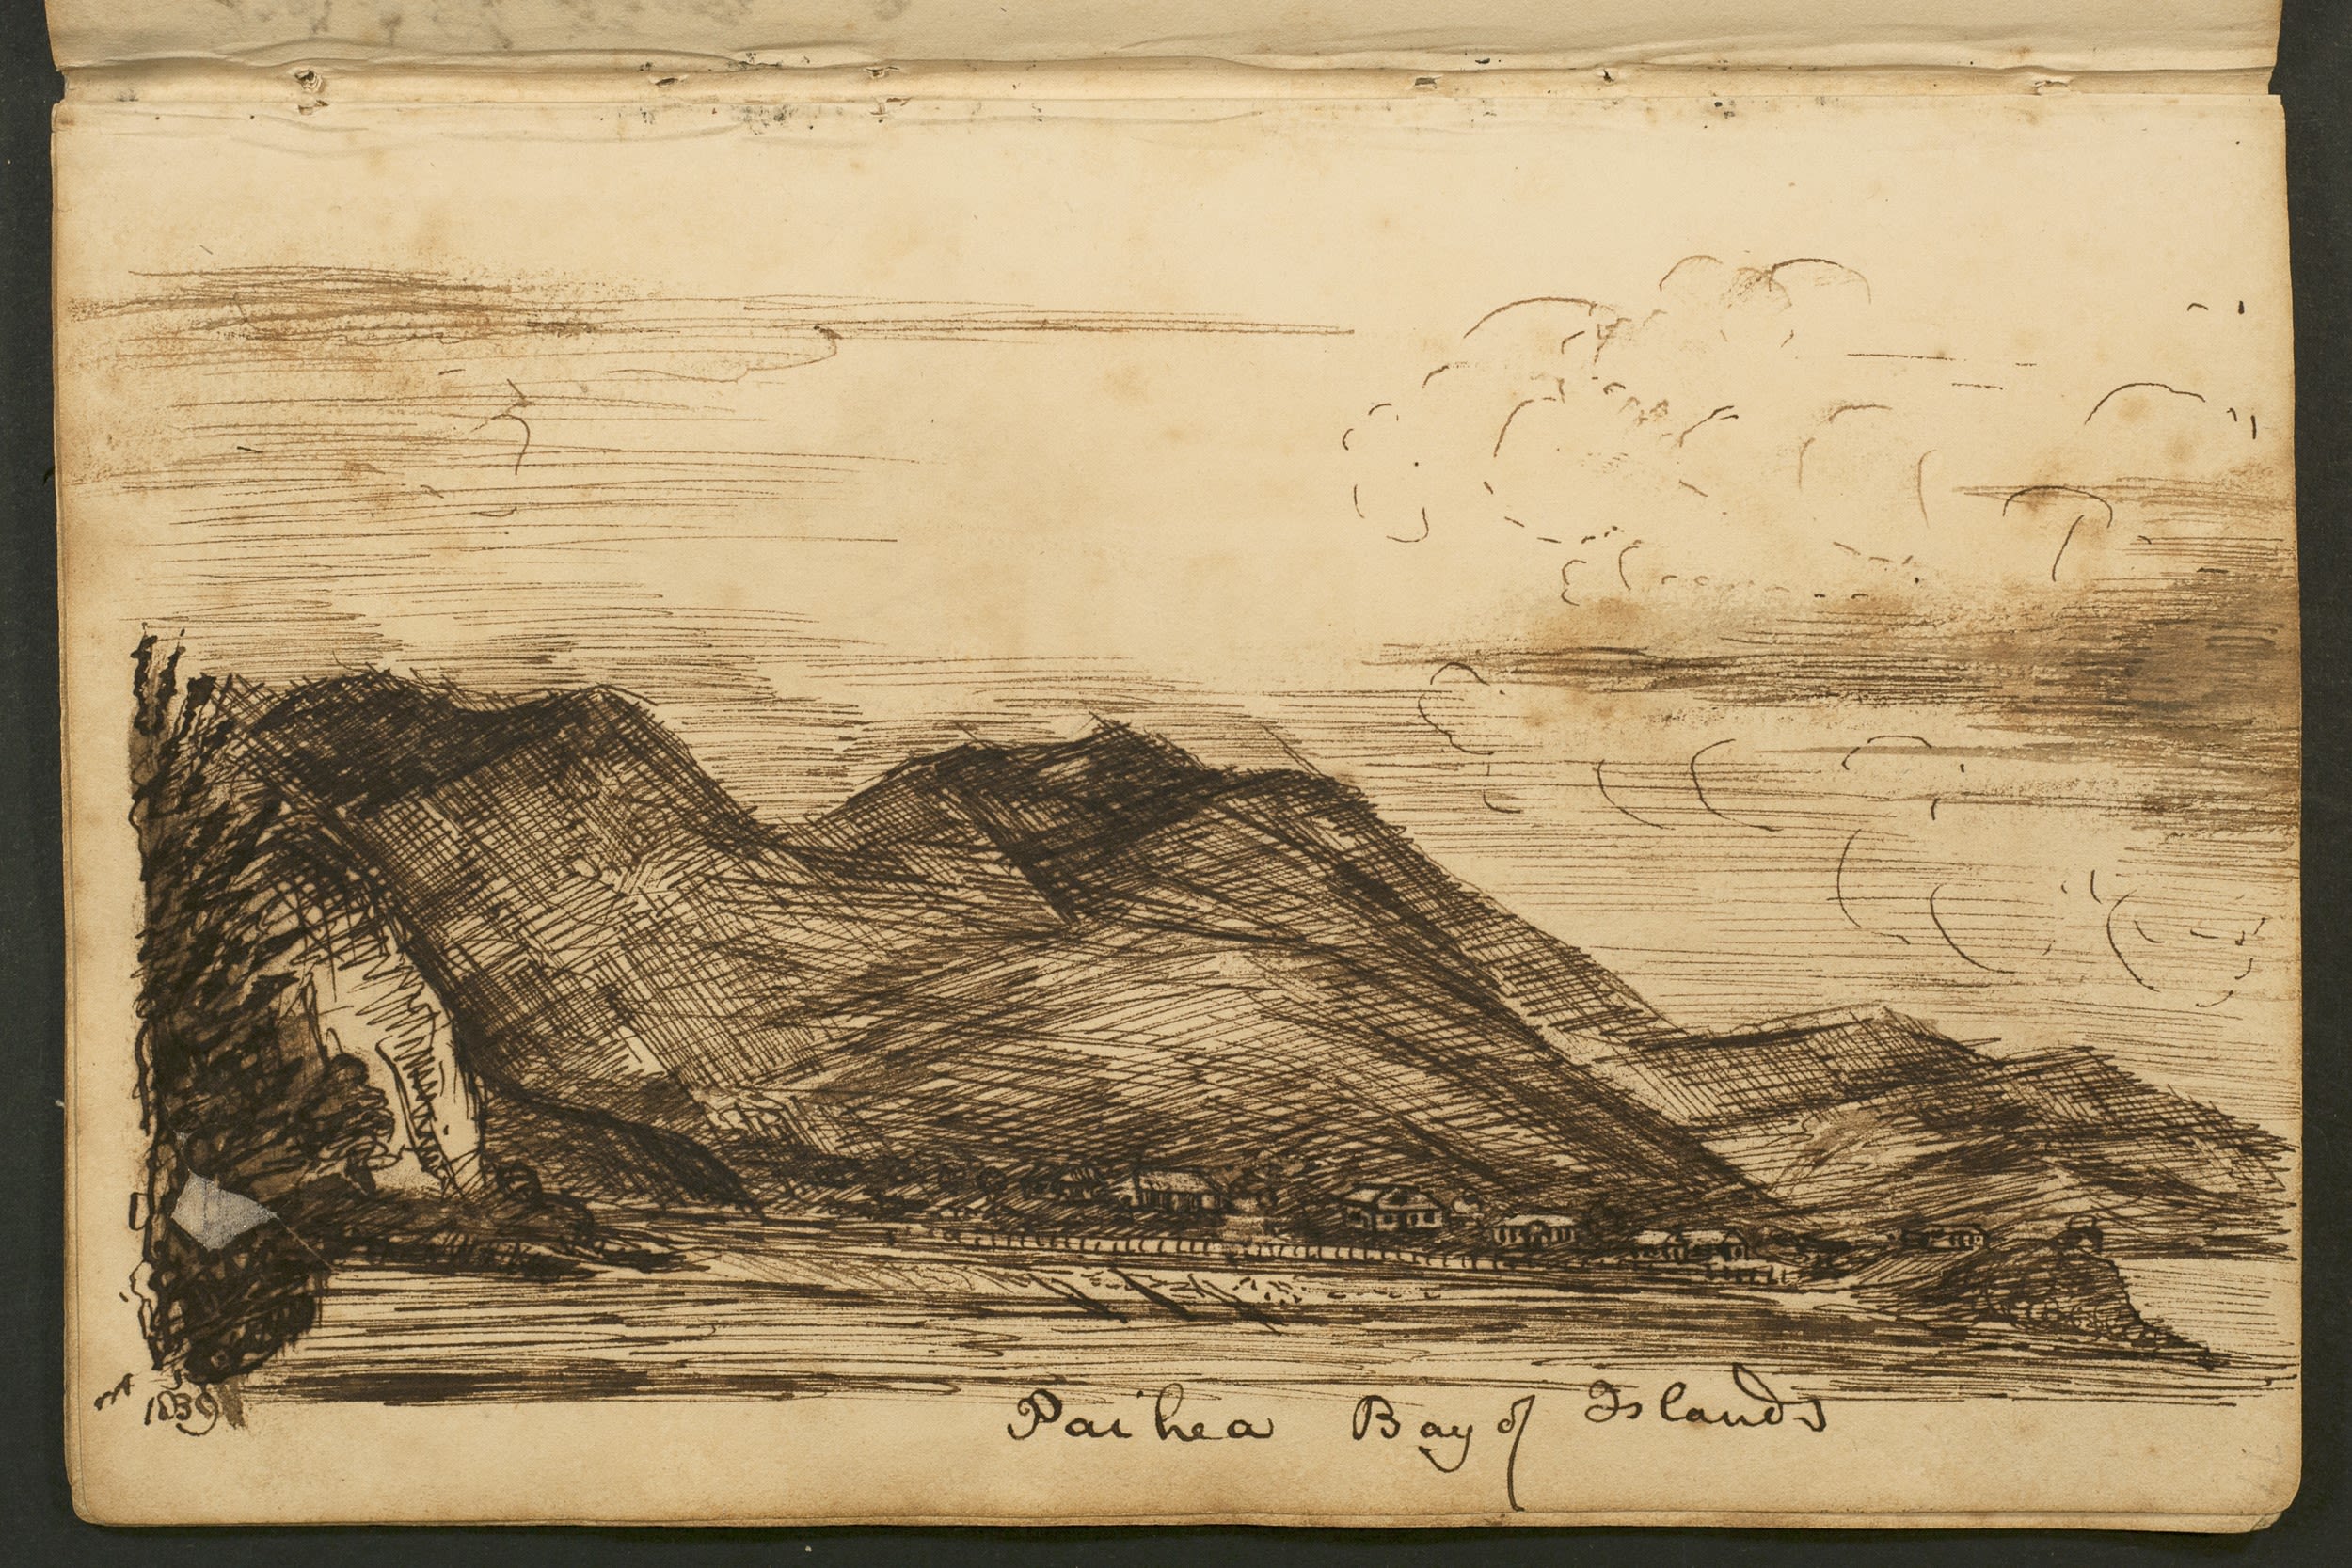 A dark sketch of a hillside and beach front on sepia paper. Tiny houses can be seen near the water.